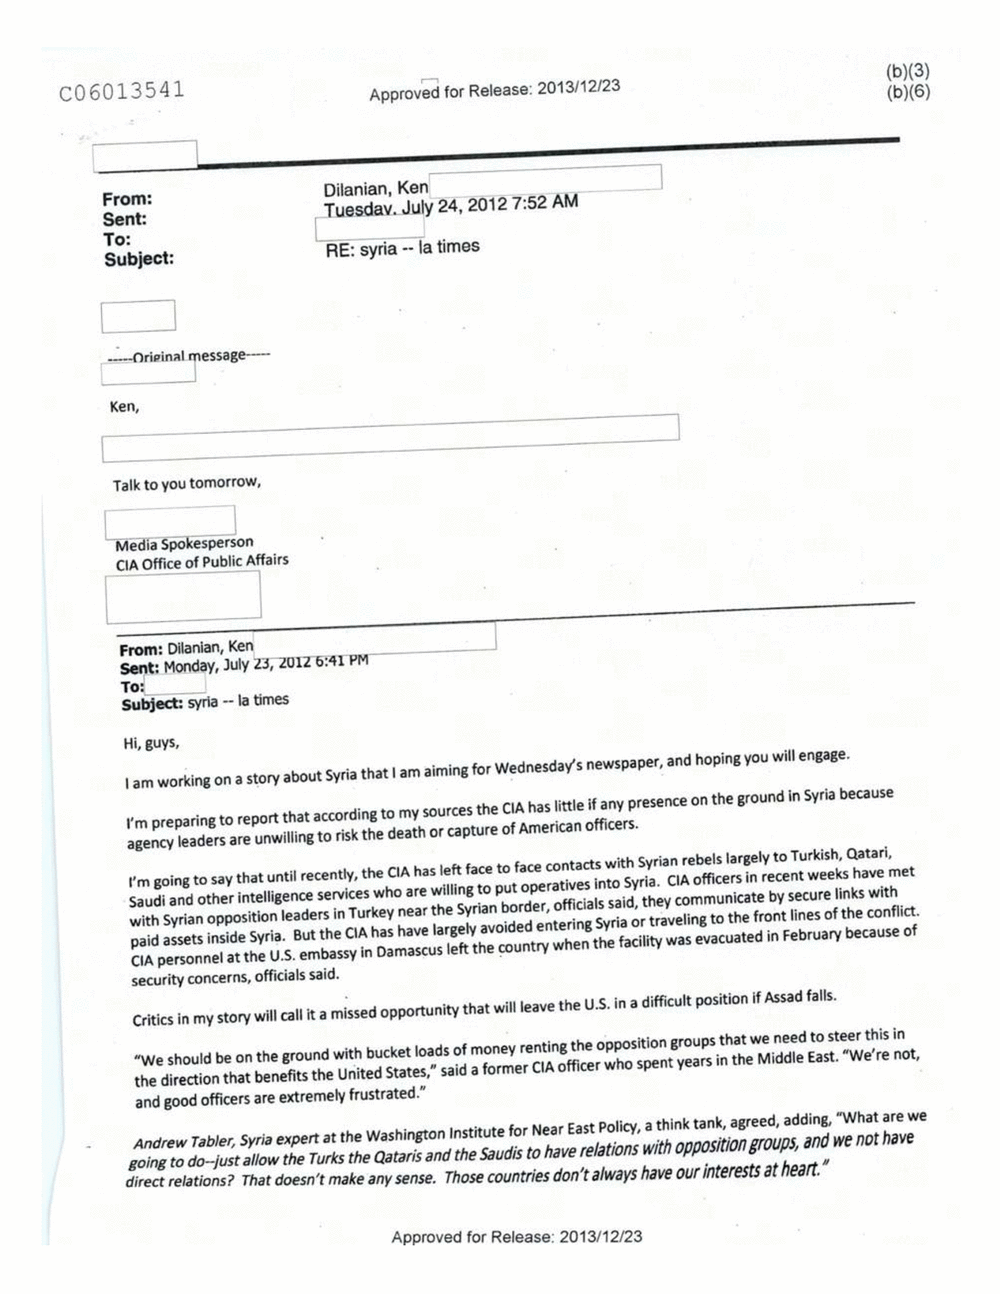 Page 394 from Email Correspondence Between Reporters and CIA Flacks